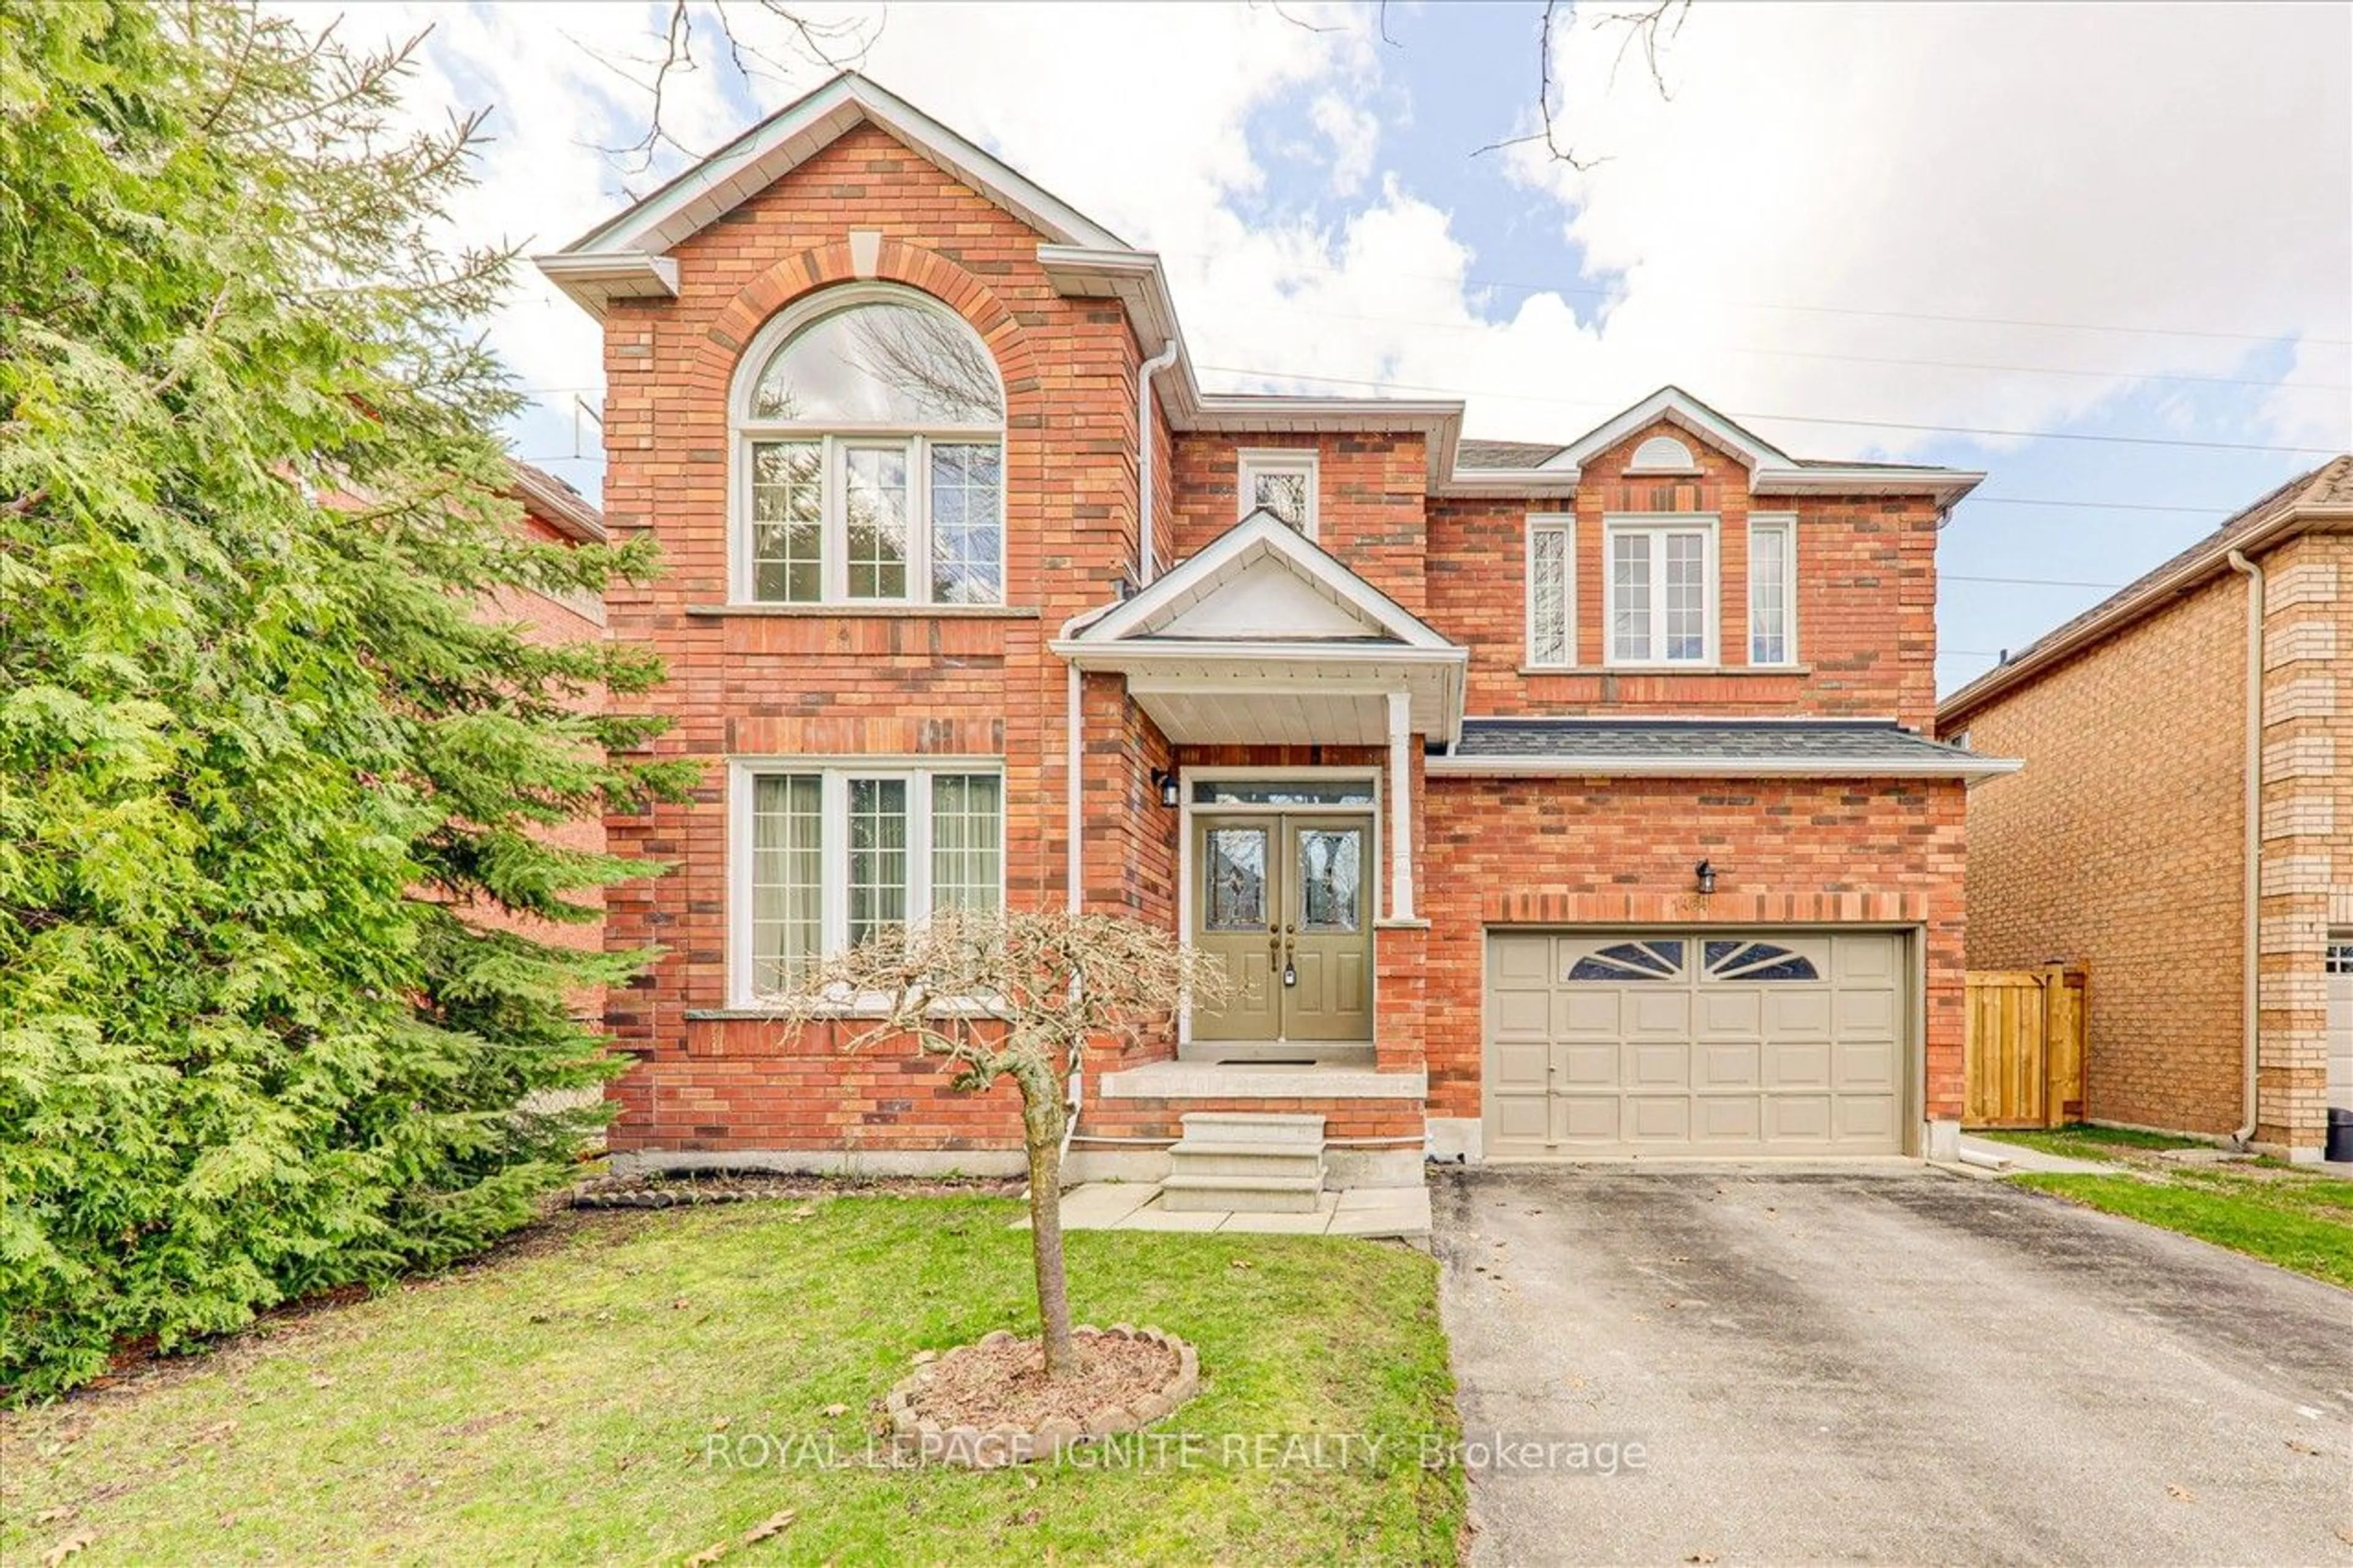 Home with brick exterior material for 1464 Sandhurst Cres, Pickering Ontario L1V 6Y7